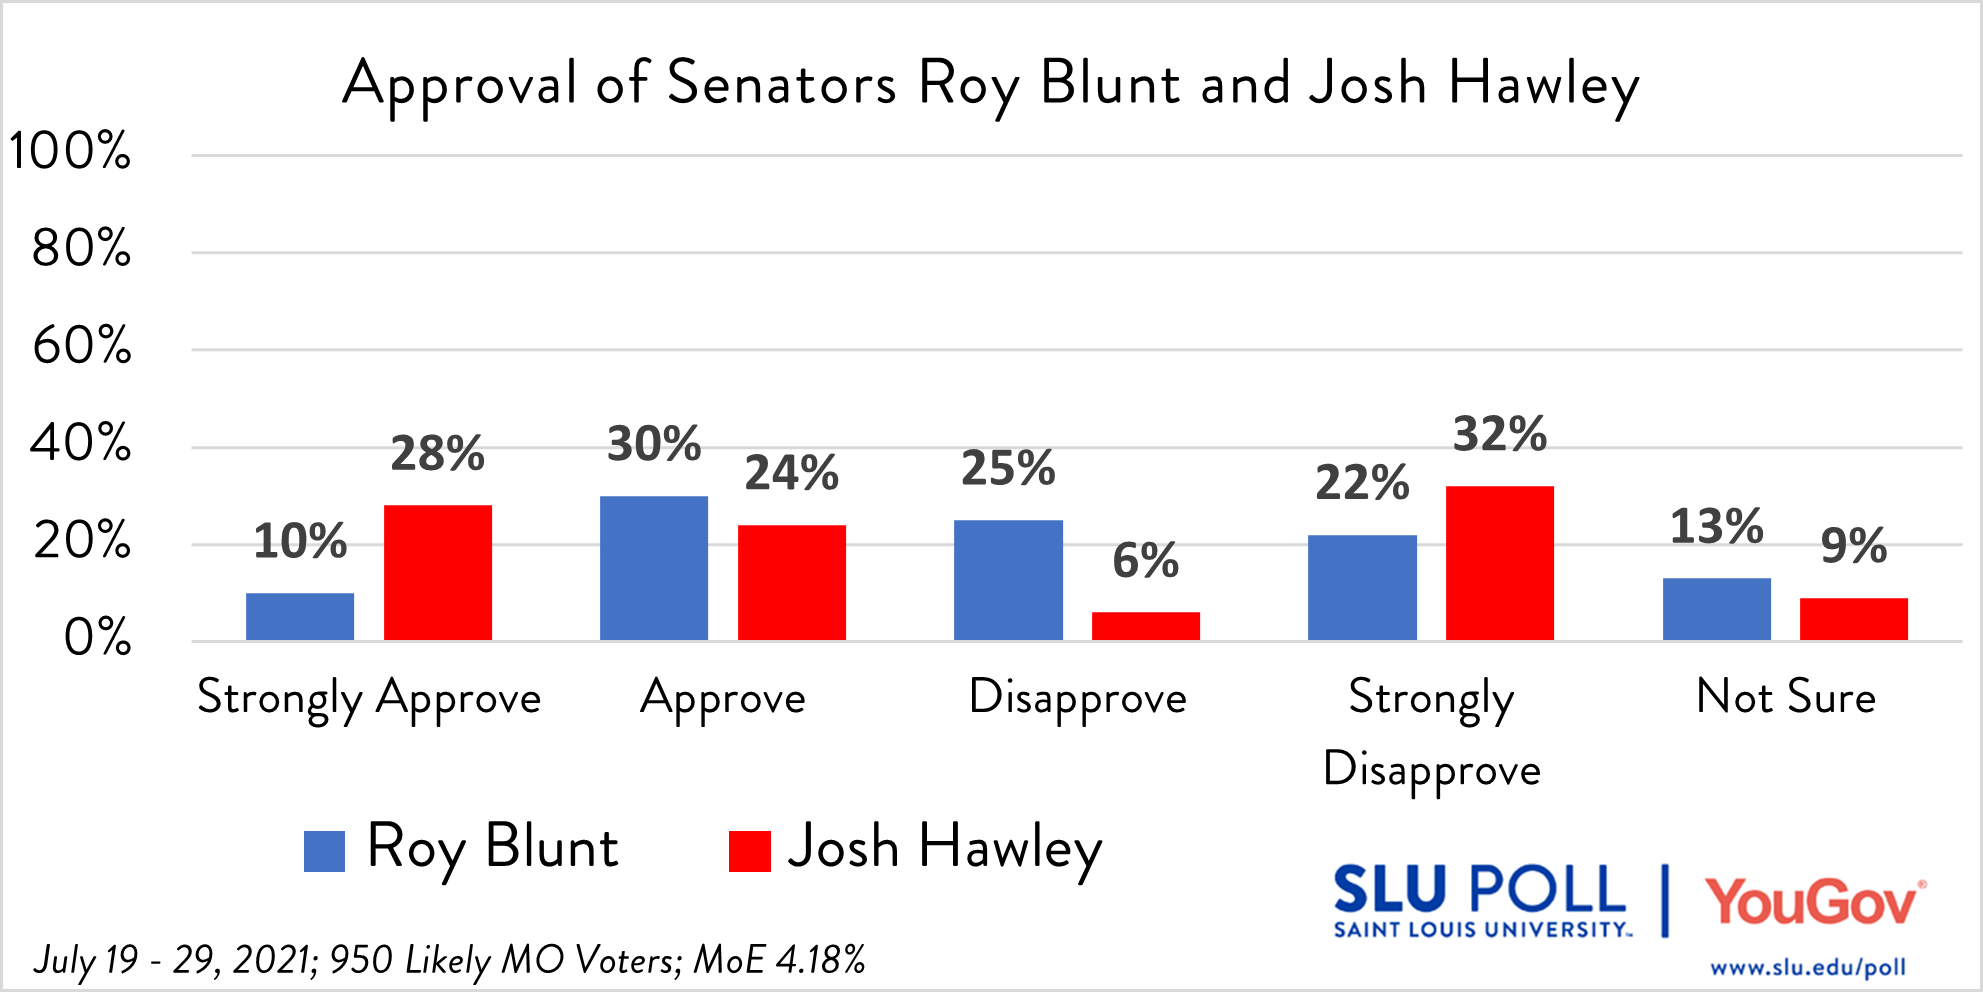 Do you approve or disapprove of the way each is doing their job…Senator Roy Blunt?  - Strongly Approve: 10% - Approve: 30% - Disapprove: 25% - Strongly Disapprove: 22%  - Not Sure: 13% Do you approve or disapprove of the way each is doing their job…Senator Josh Hawley?  - Strongly Approve: 28% - Approve: 24% - Disapprove: 6% - Strongly Disapprove: 32%  - Not Sure: 9%